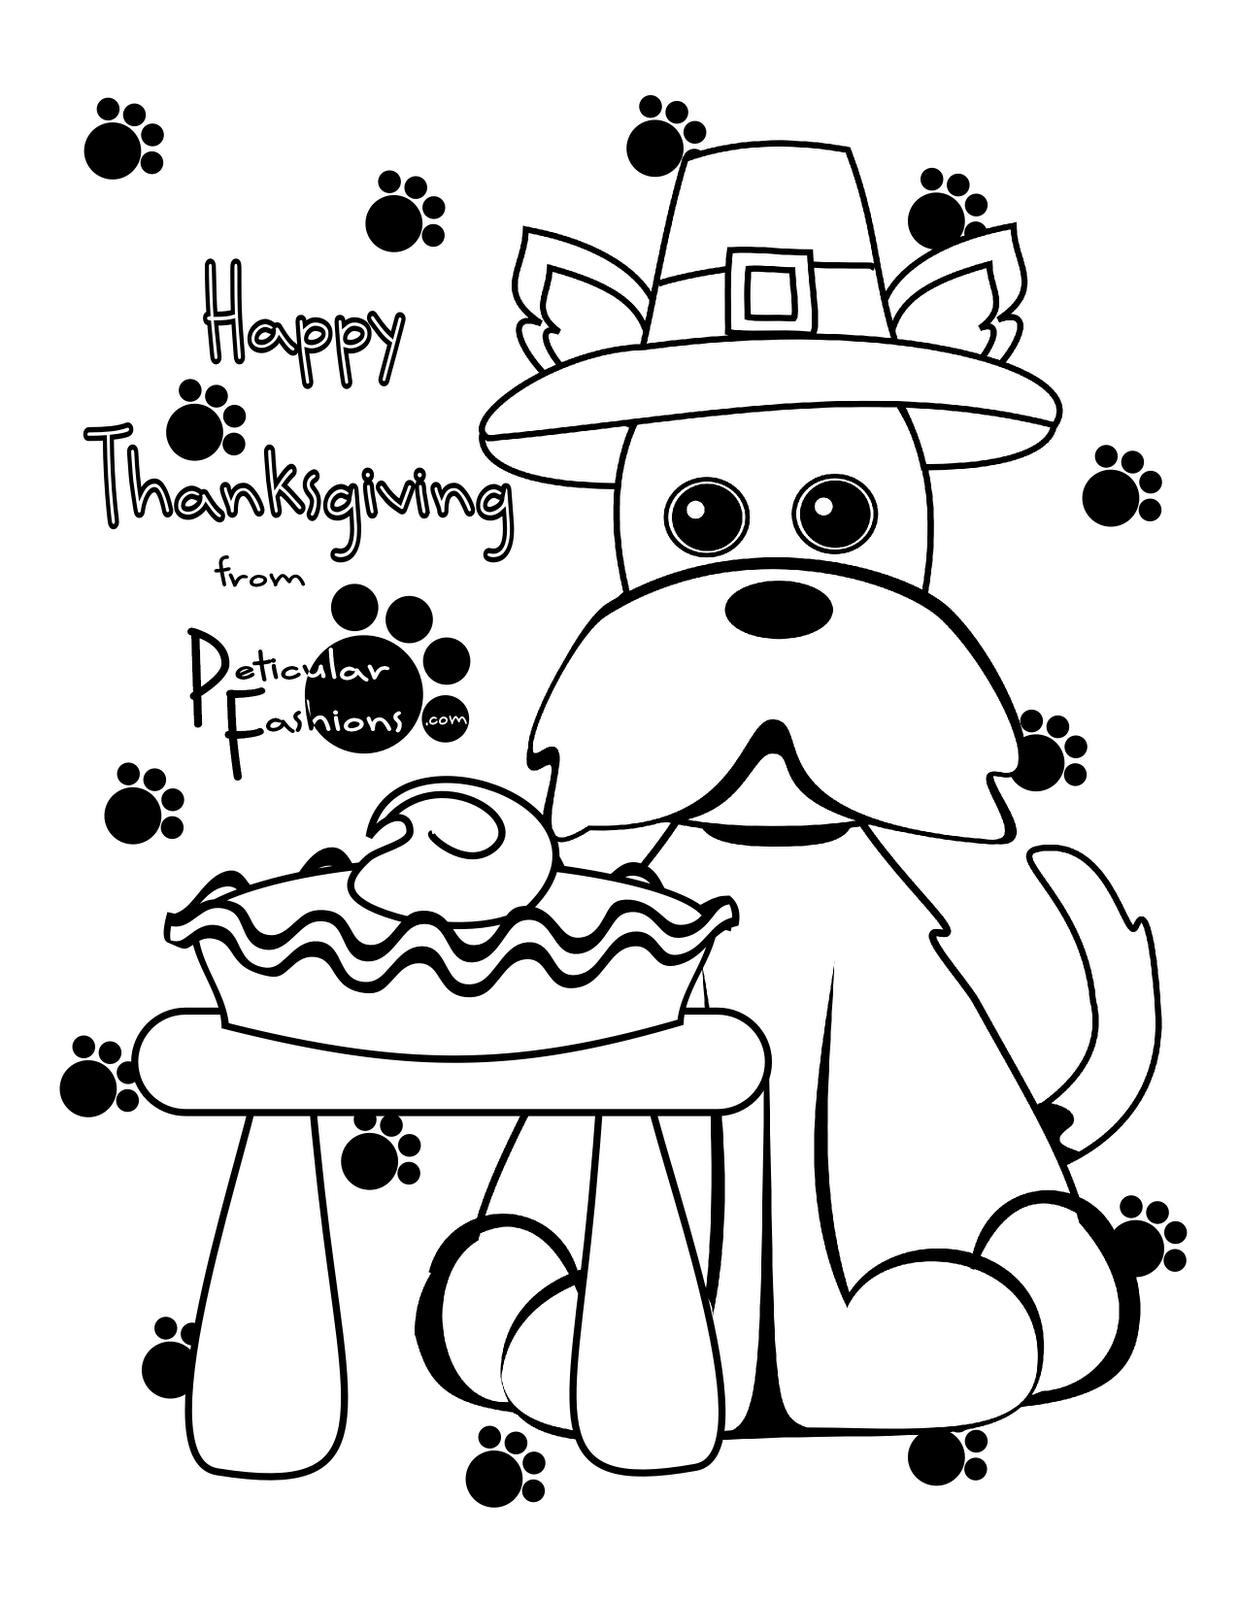 Download ThanksGiving Coloring Pages - Free Printable Pictures ...